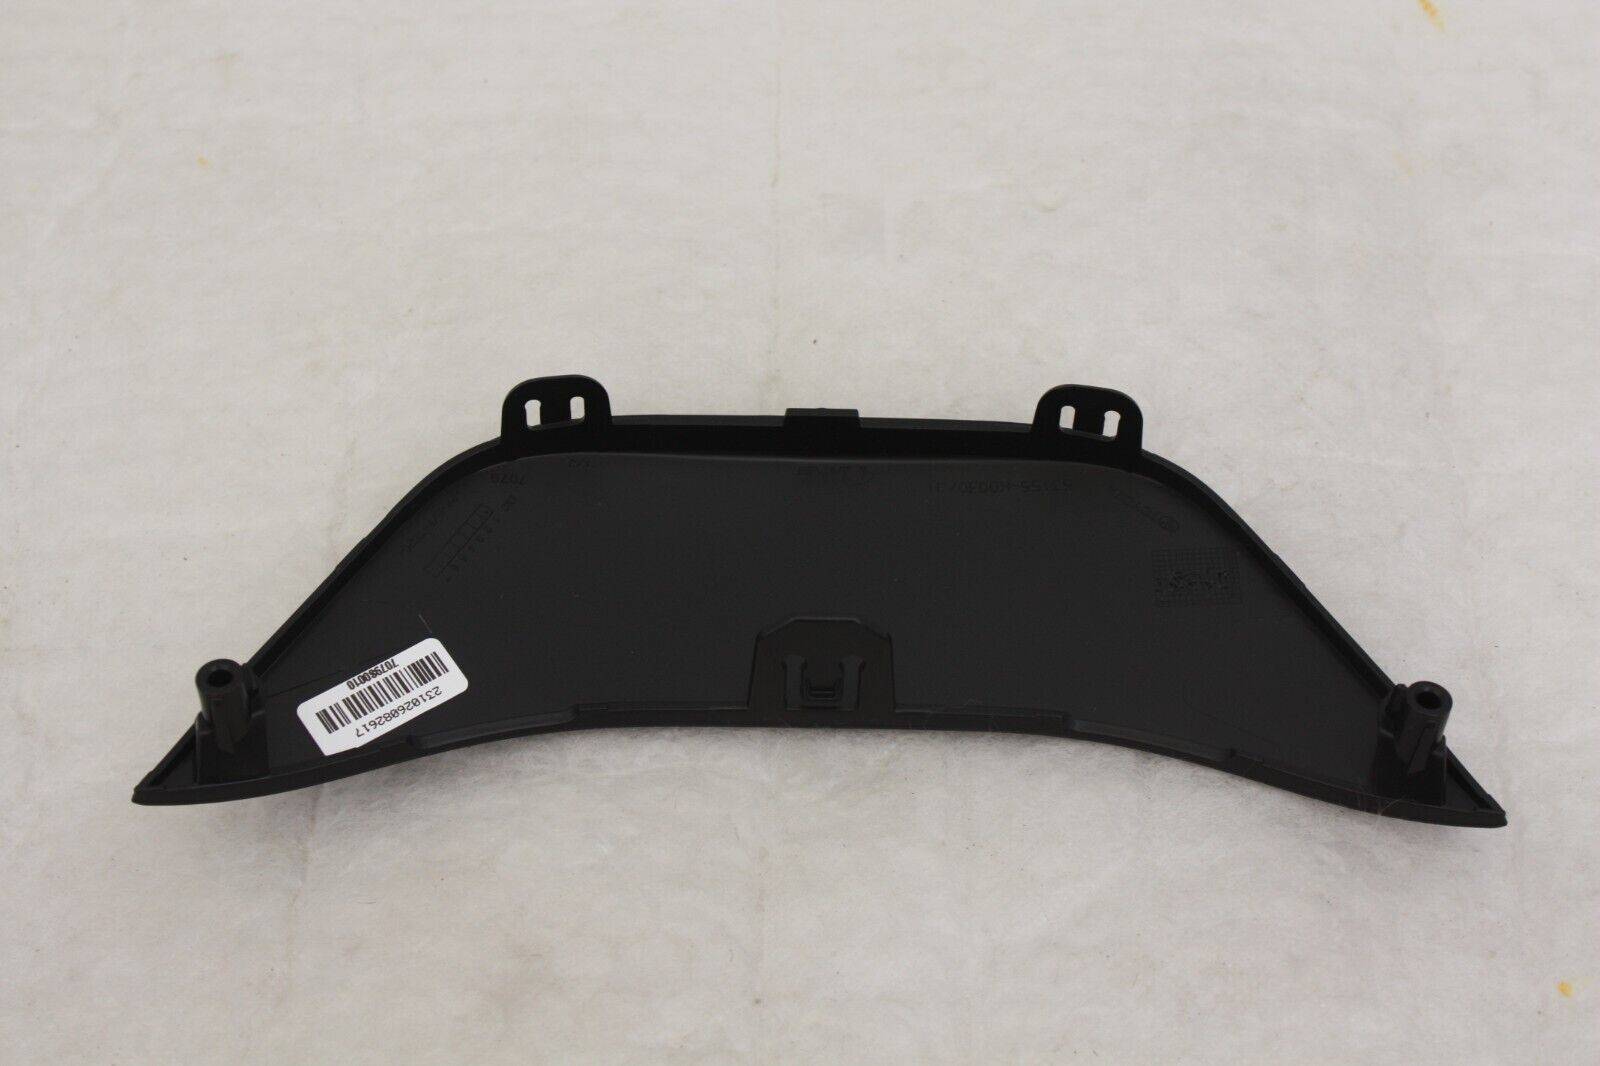 Toyota-Yaris-Front-Bumper-Grill-Cover-2020-ON-53155-K0031-Genuine-176345660711-4